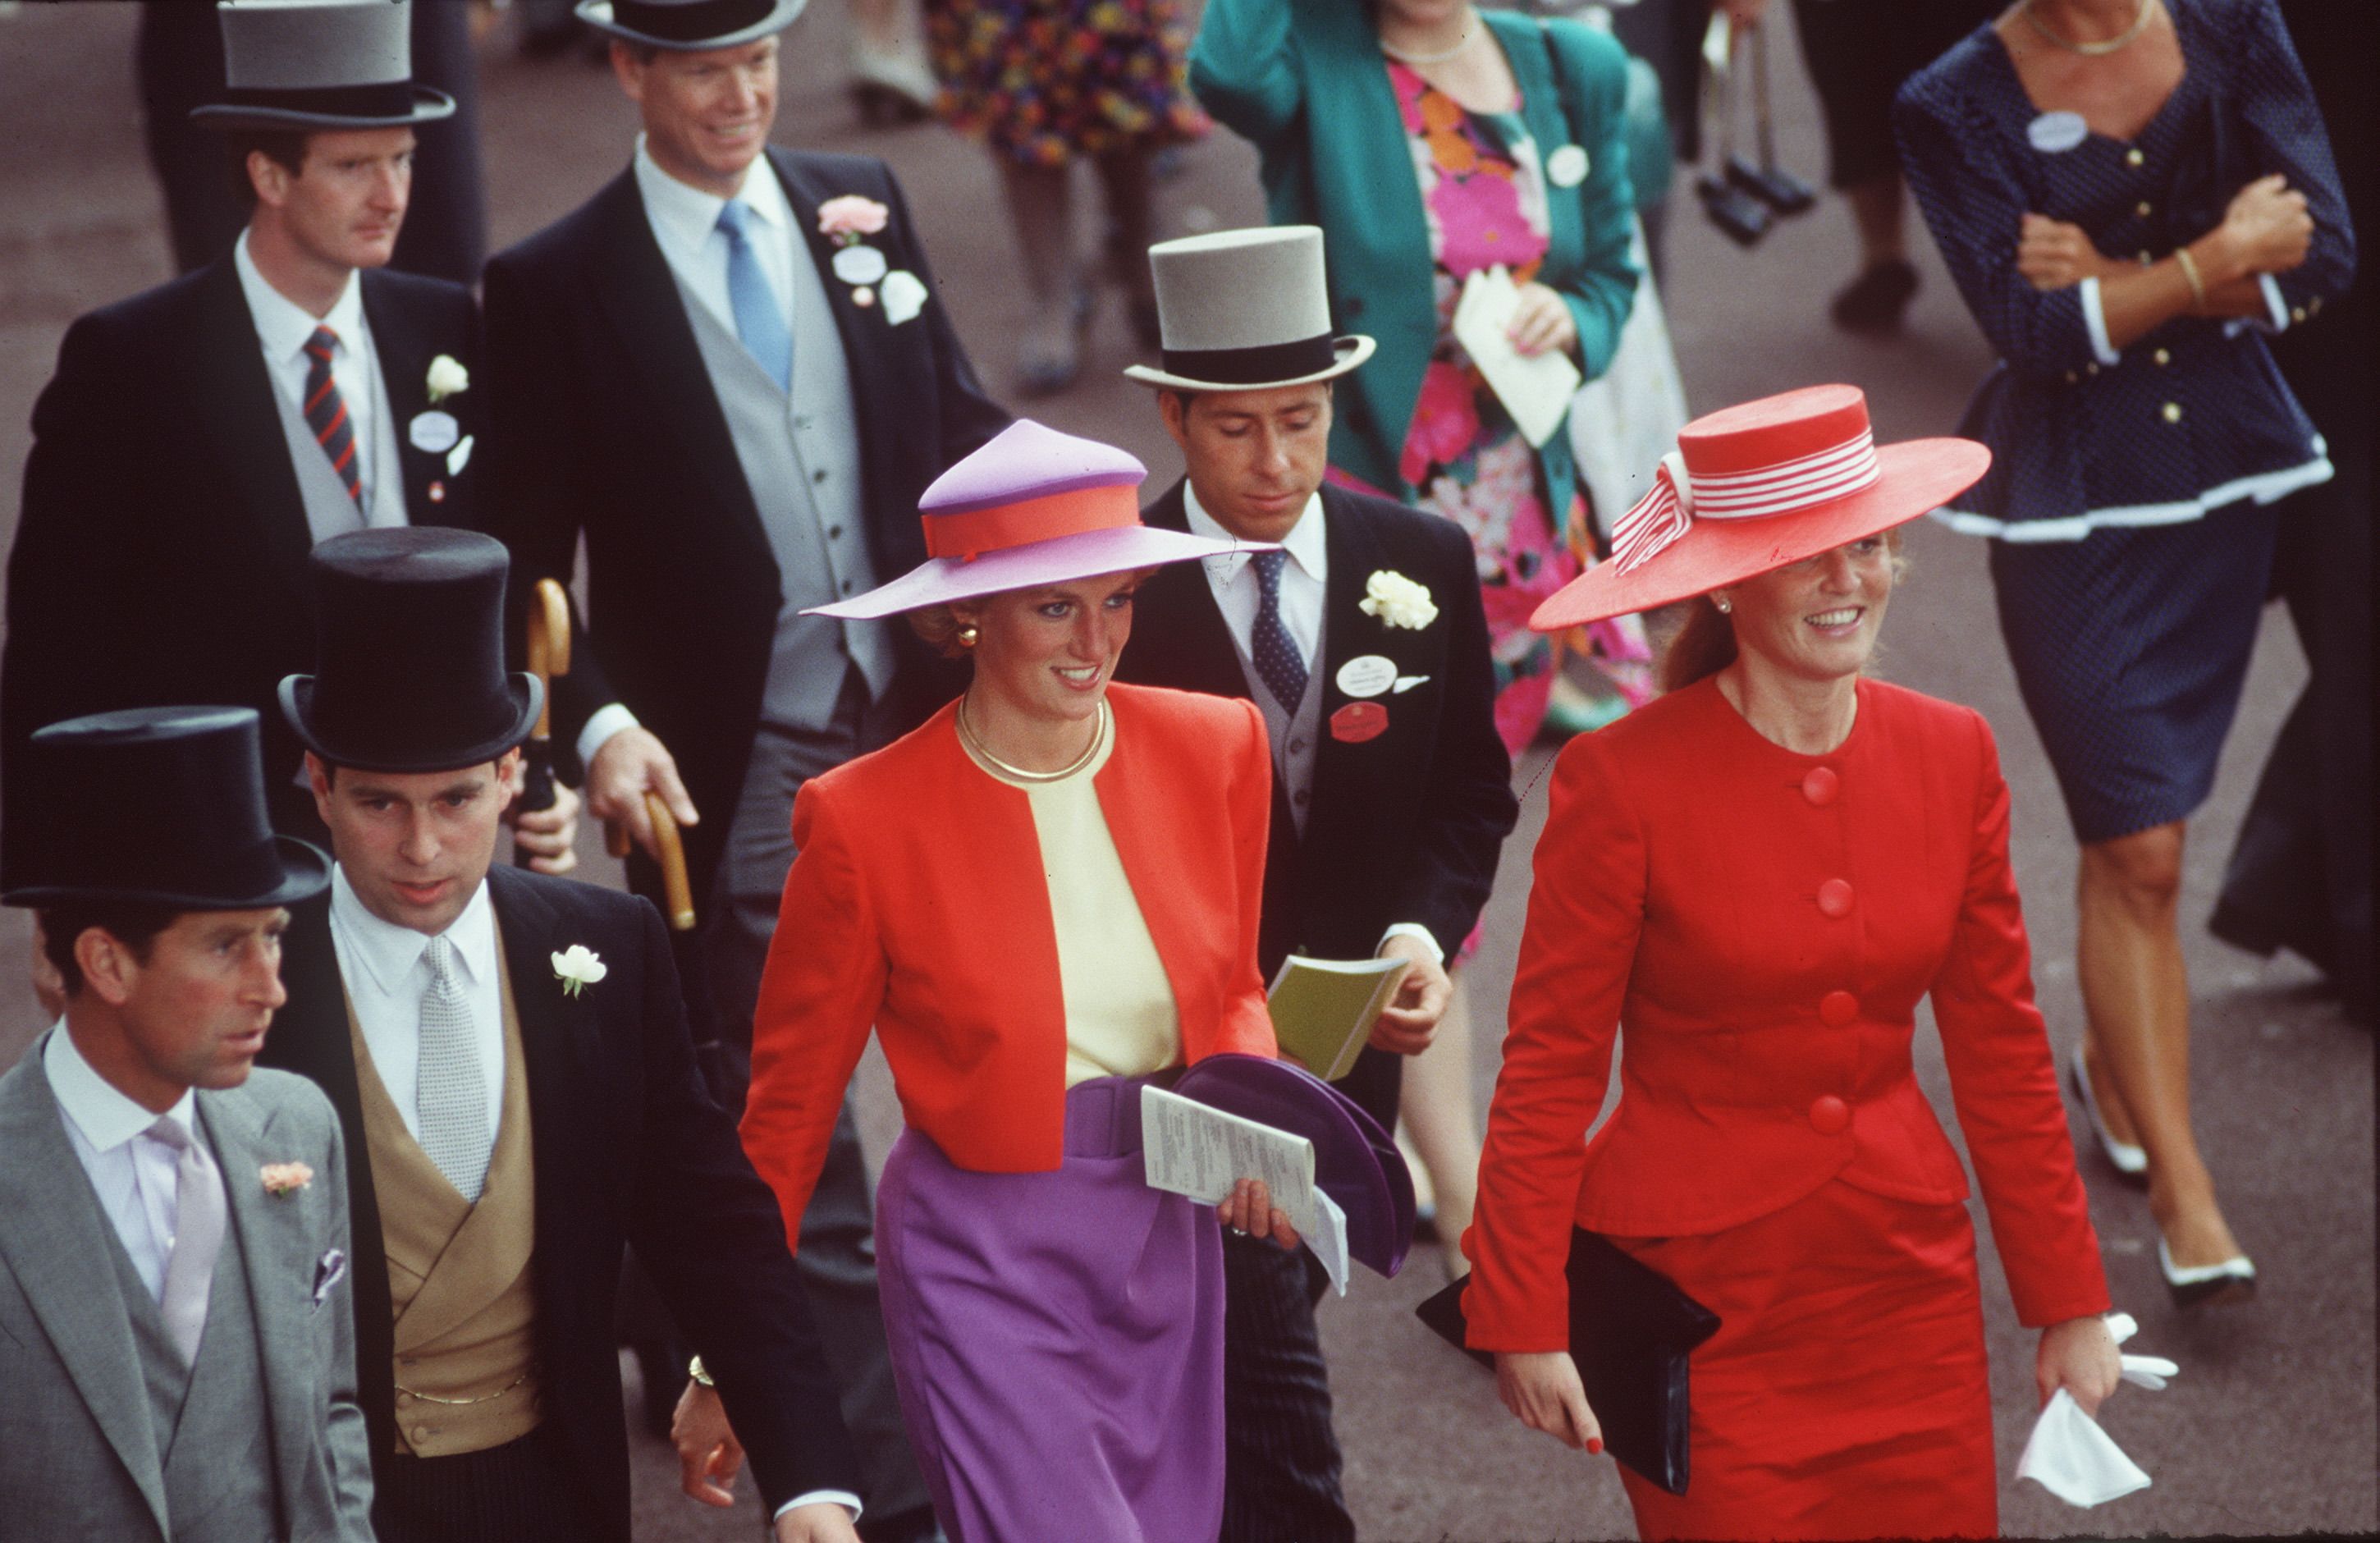 Ascot Races England UK 1986 scanned in 2018 the British Royal Family arrive  and walk about at Royal Ascot in 1986. Queen Mother Members of the public  dressed in fine hats and